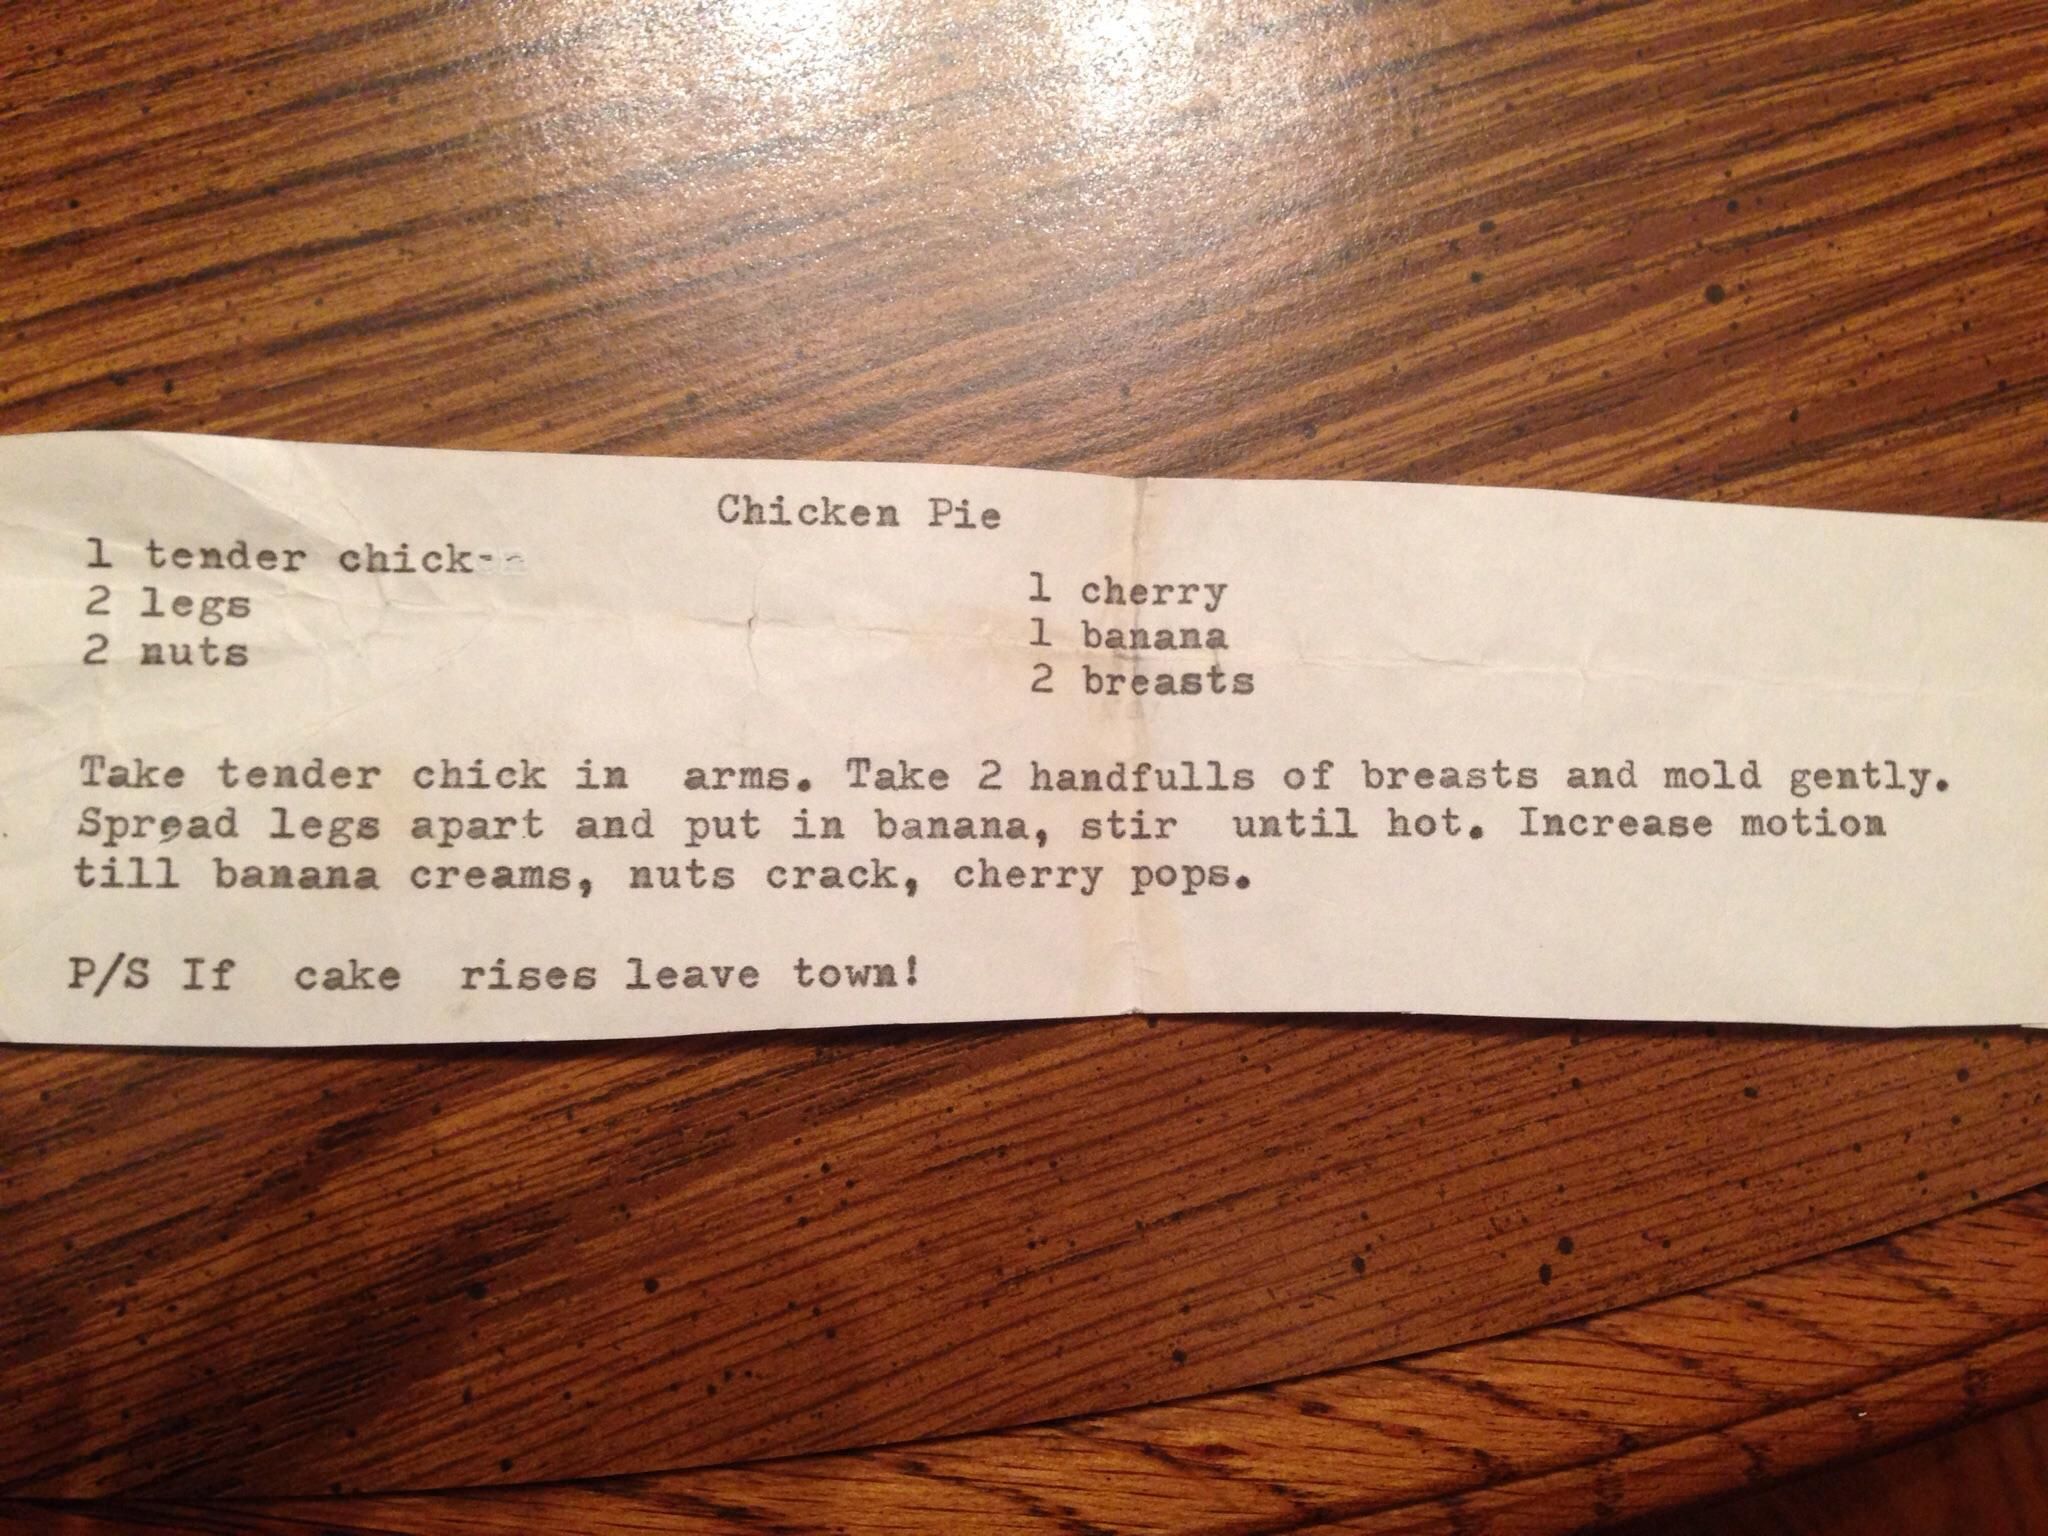 Found this excellent recipe for chicken pie in my grandfathers wallet while going through his stuff after he died